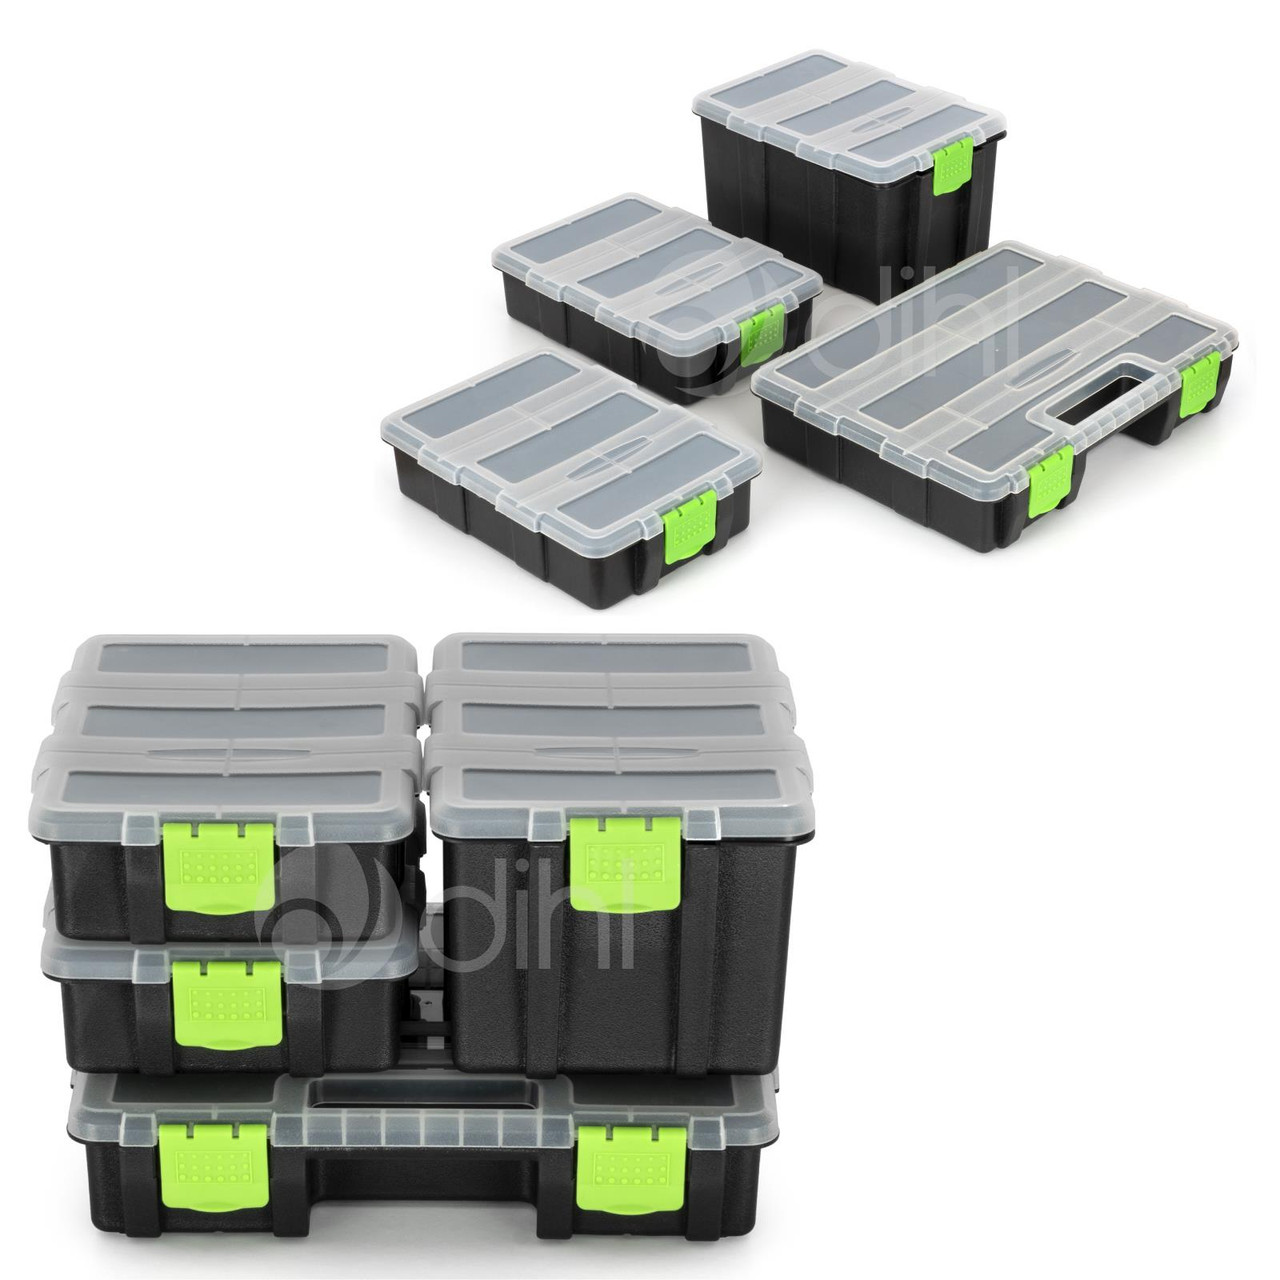  Storage Bins For Nails And Screws